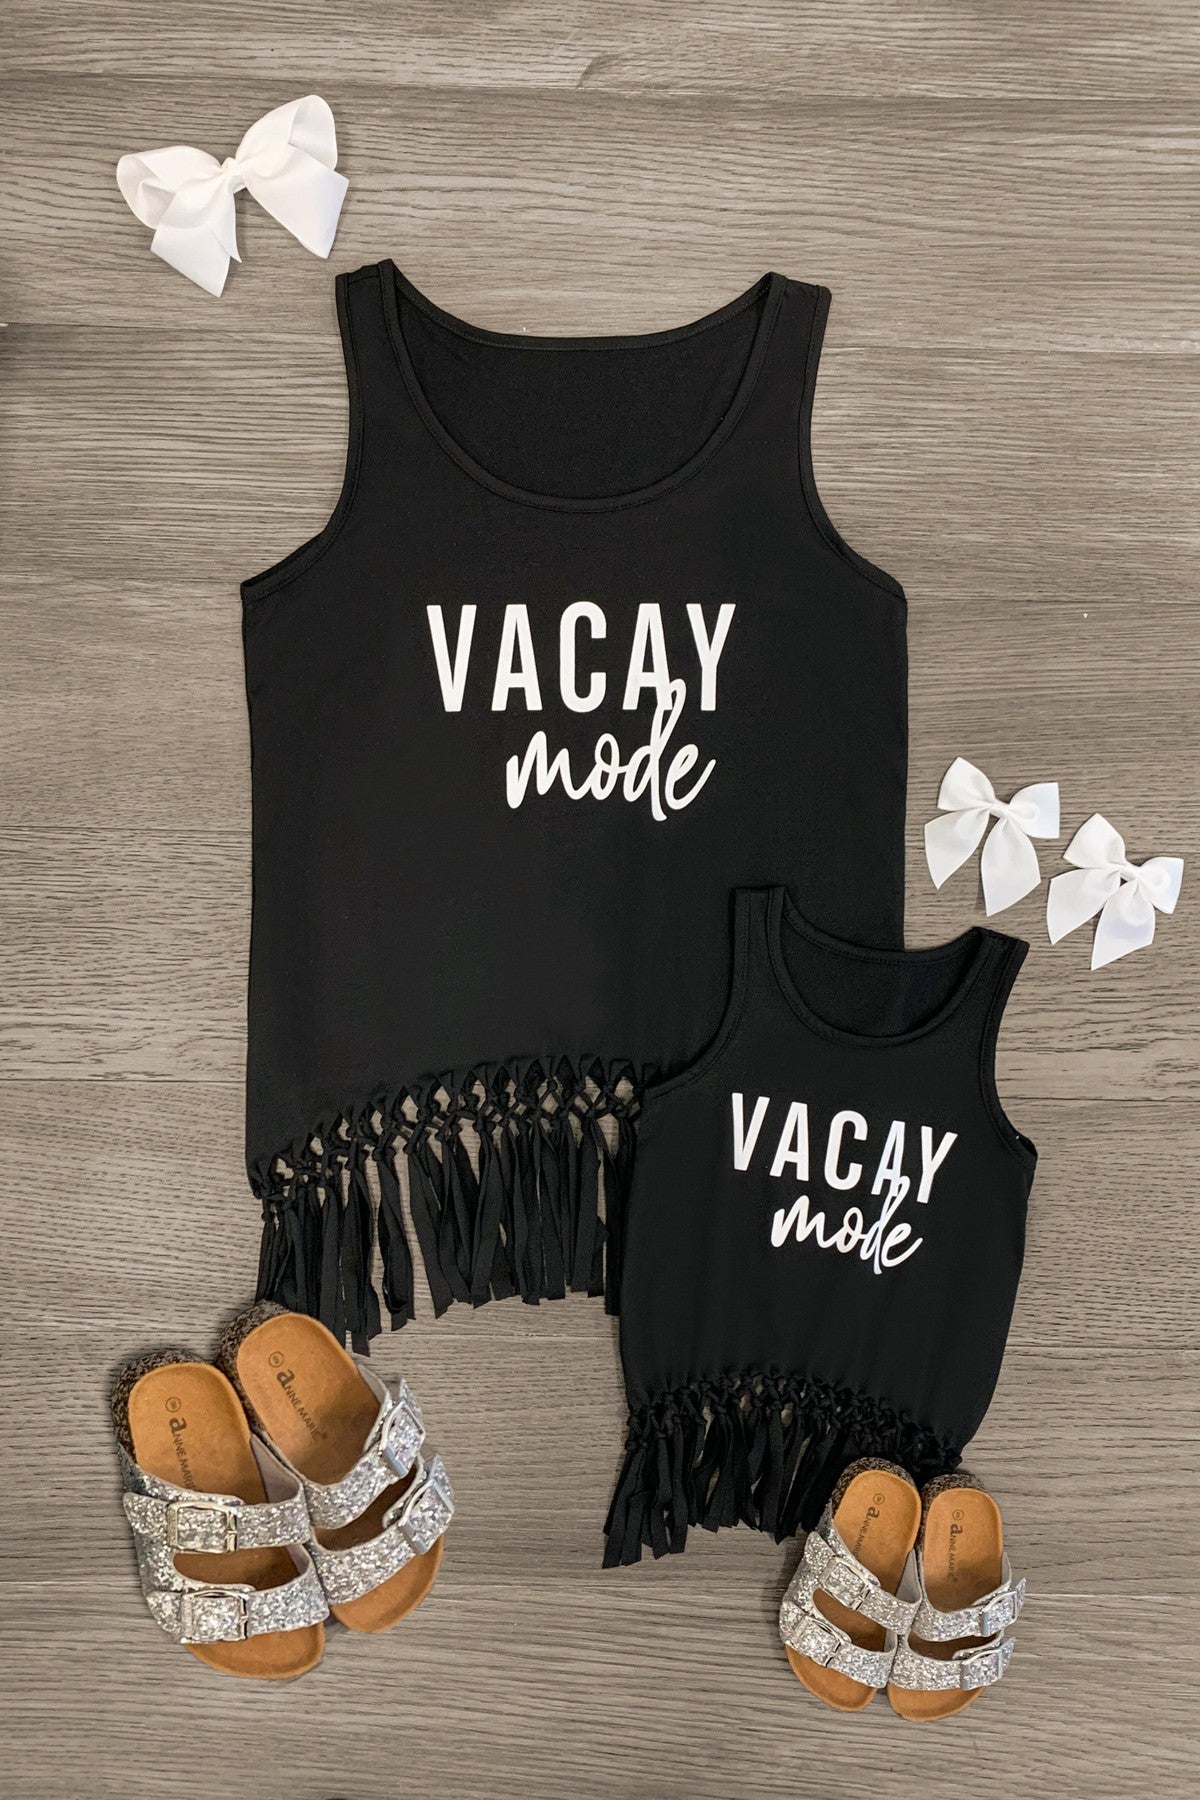 Mom & Me - "Vacay Mode" Black Tank Top - Sparkle in Pink